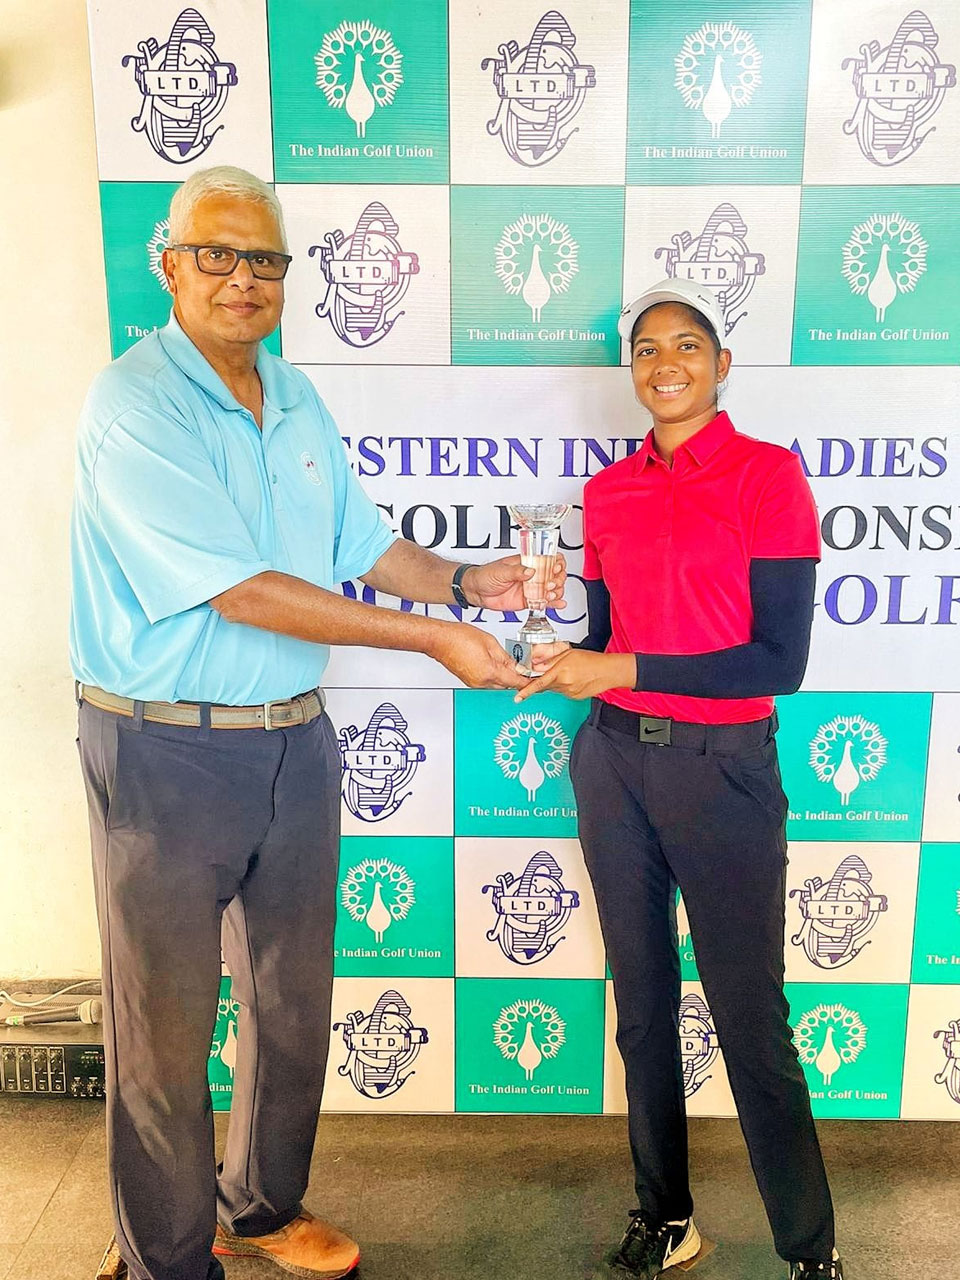 Kaya Daluwatte finished 3rd in the A & B combined Category in the IGU Western India Girls Championship